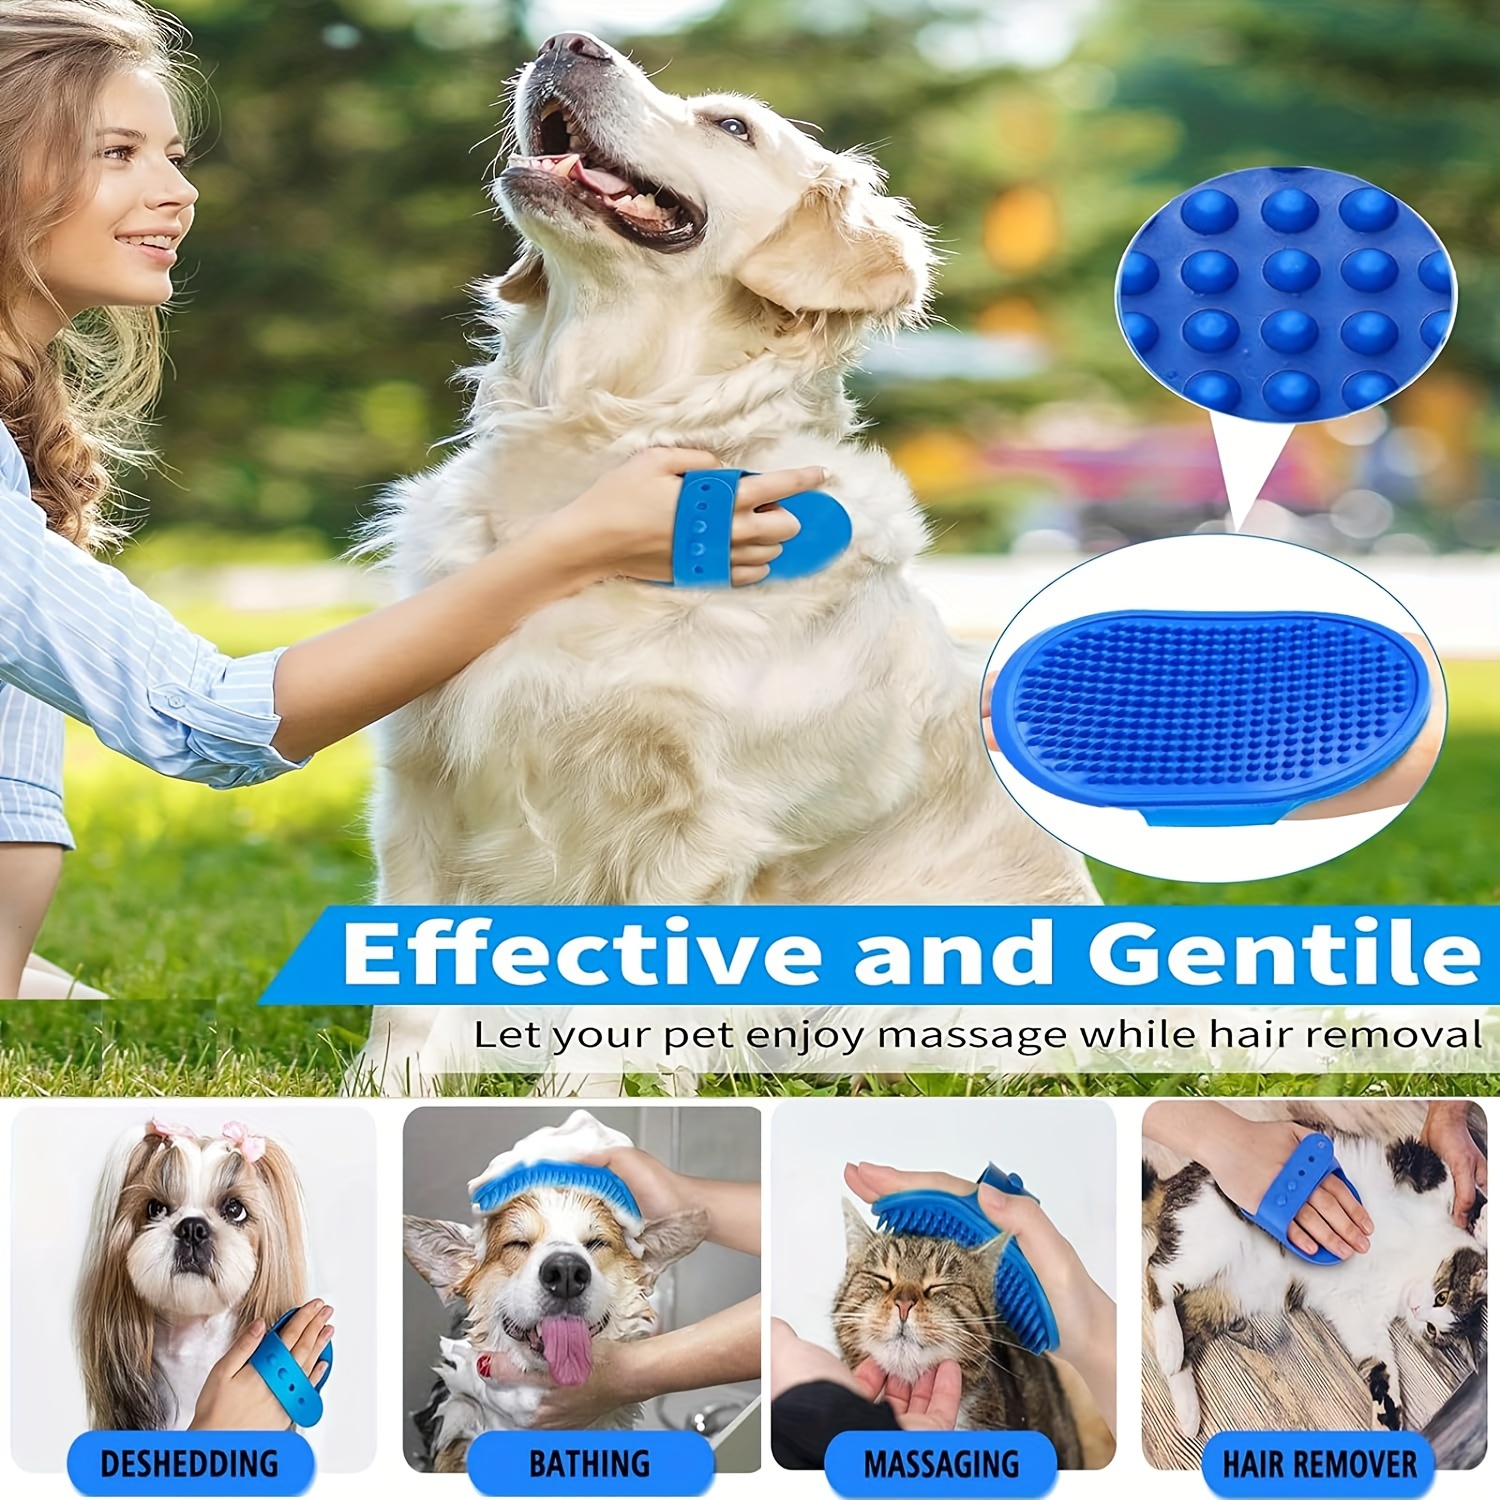 Lick Mat for Dogs, Peanut Butter Slow Feeder for Pet, Dog Lick Pad